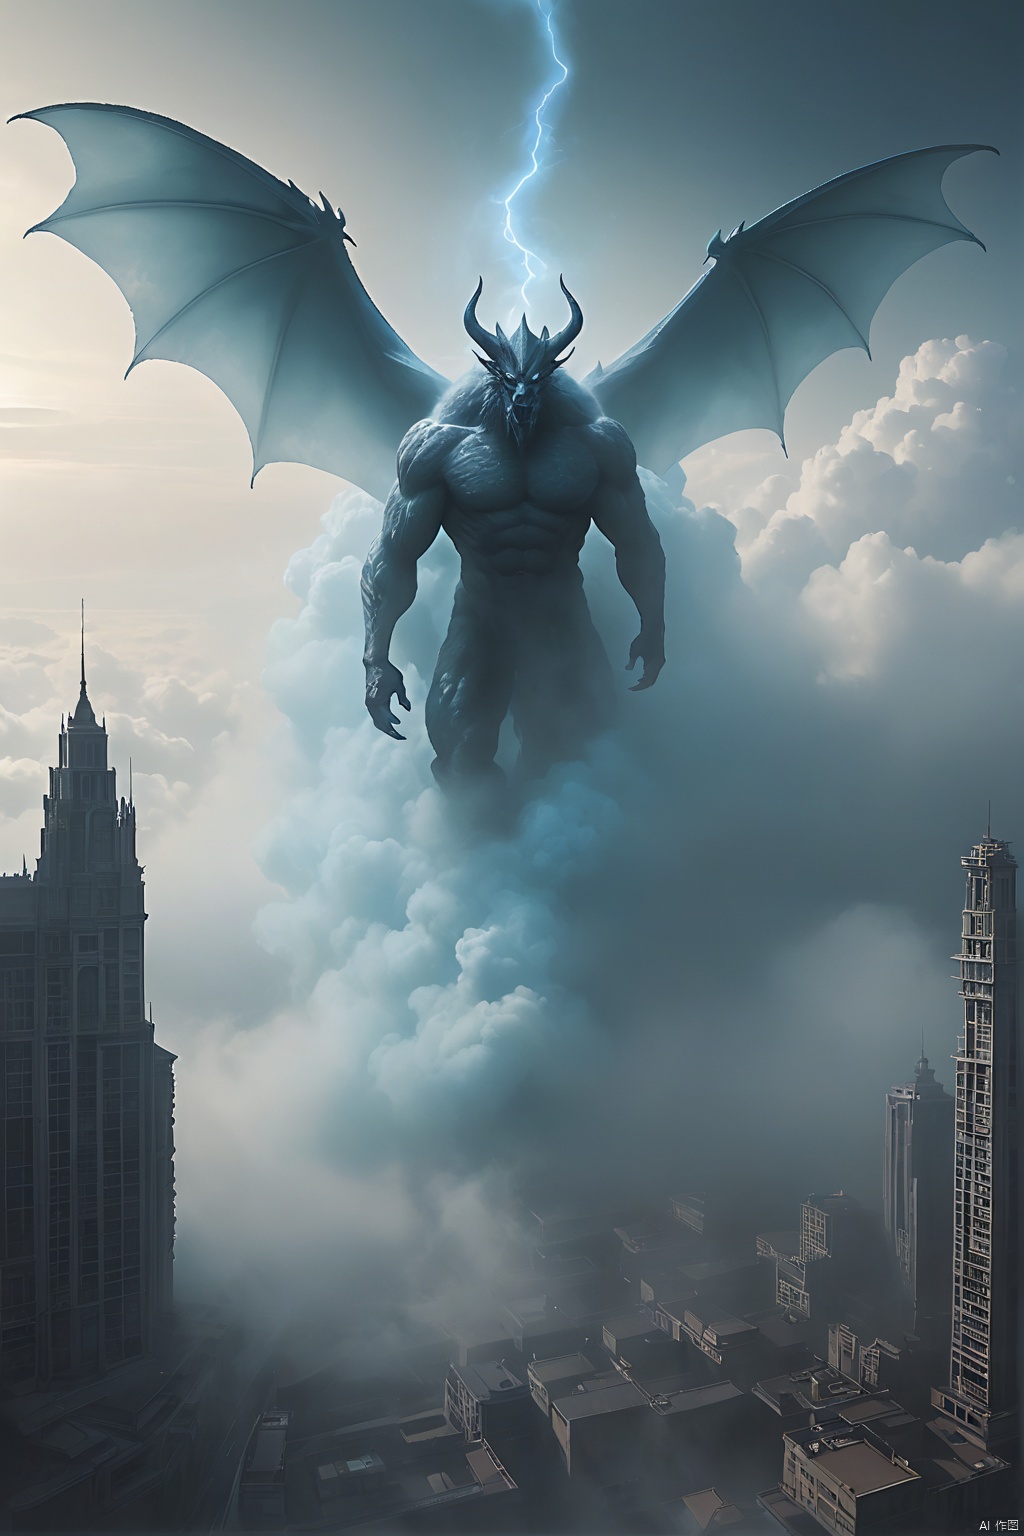  Giant Creature, (Super Giant Cloud Demon coalesced by thick fog), floating over the city,, Cloud Demon's body is immense like a huge white cloud, eyes glinting with intelligence, it's body is surrounded by white clouds, connecting it to the sky and the earth, in the midst of the city's hustle and bustle, thick fog, Creature's body is tall and tall in the sky, with a hooded cover, Robust human body is covered by a large amount of white dark fog, thick fog, Bio-Chemical Mutant Nuclear Grotesque, Bioluminescent Bioluminescent, Zdzistaw Beksinski, H R Giger, Webbed Feet Webbed Foot Tentacles, Rudimentary Wings Mutilated Wings, Erratic Irregular, Wrinkled Folds. Microbiology Microbiology, Phosphorescent Phosphorescent, Scaly, Camouflaging Camouflaging, Translucent Resin Wave Style, bryce 3d, Fresco-like Composition, Weathered Material, Luminous, The
Background: looking up from below